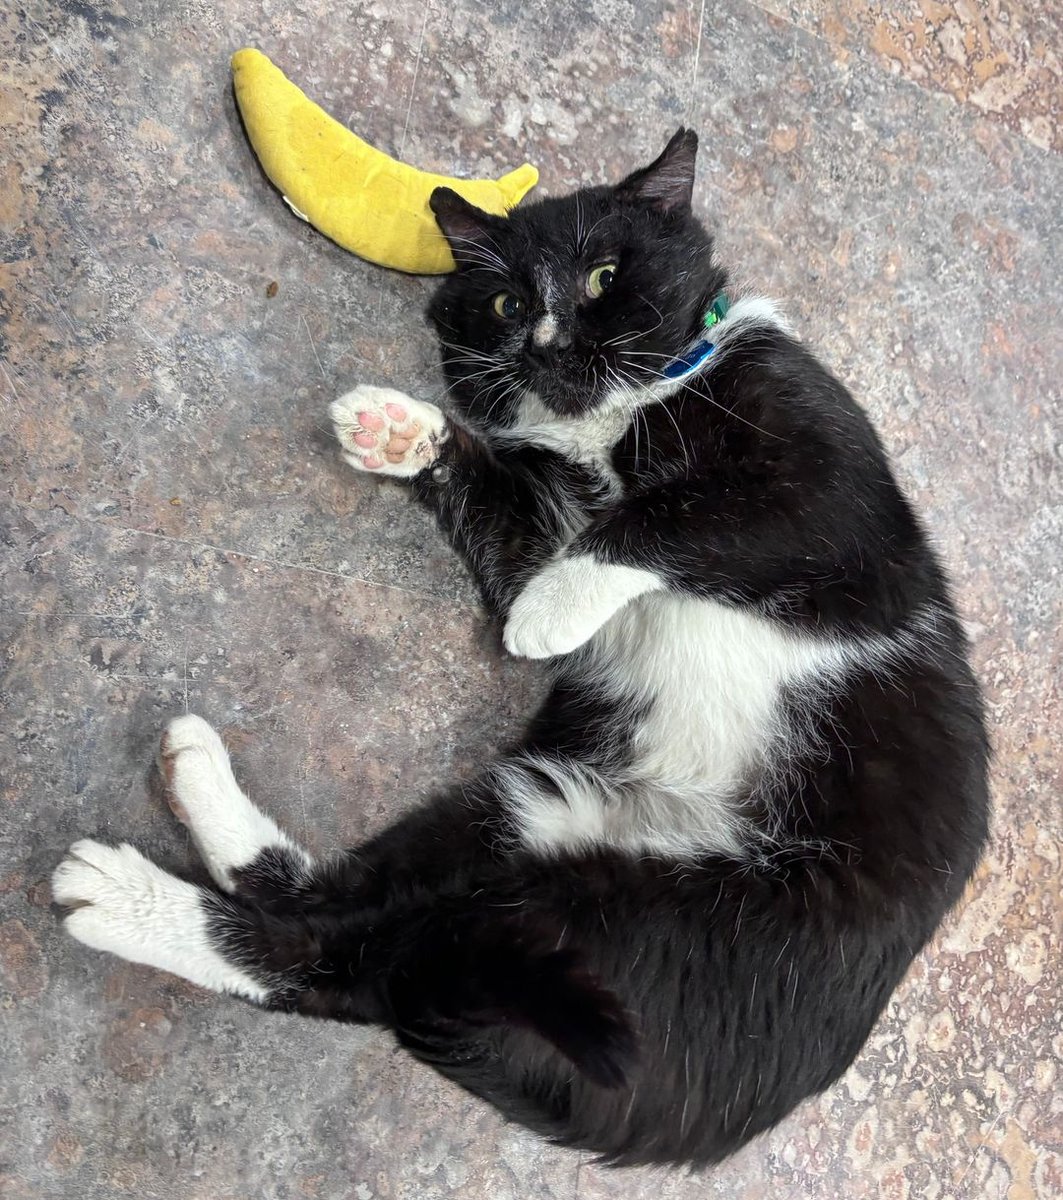 Guido is going bananas over his @YeowwwCatnip toy! 🍌 Did you know that the active compound in catnip, nepetalactone, triggers a response in some cats, inducing behaviors like rolling, rubbing, purring, and heightened playfulness?! How does your kitty react to catnip?